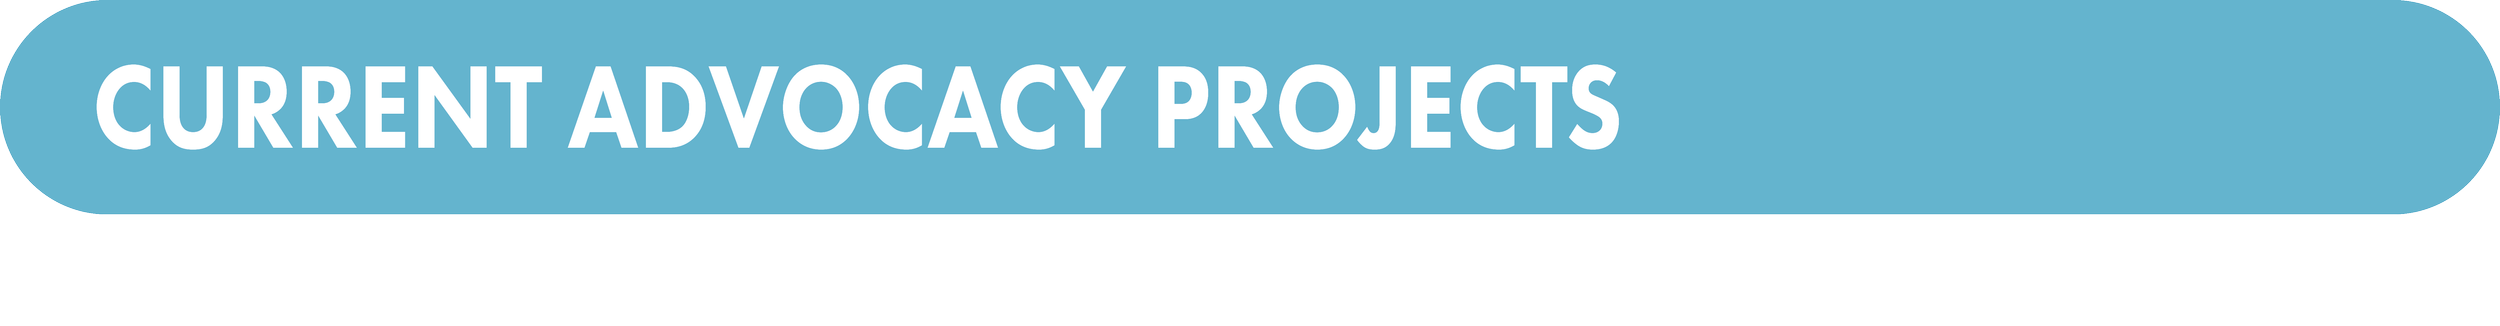 teal advocacy projects button.png